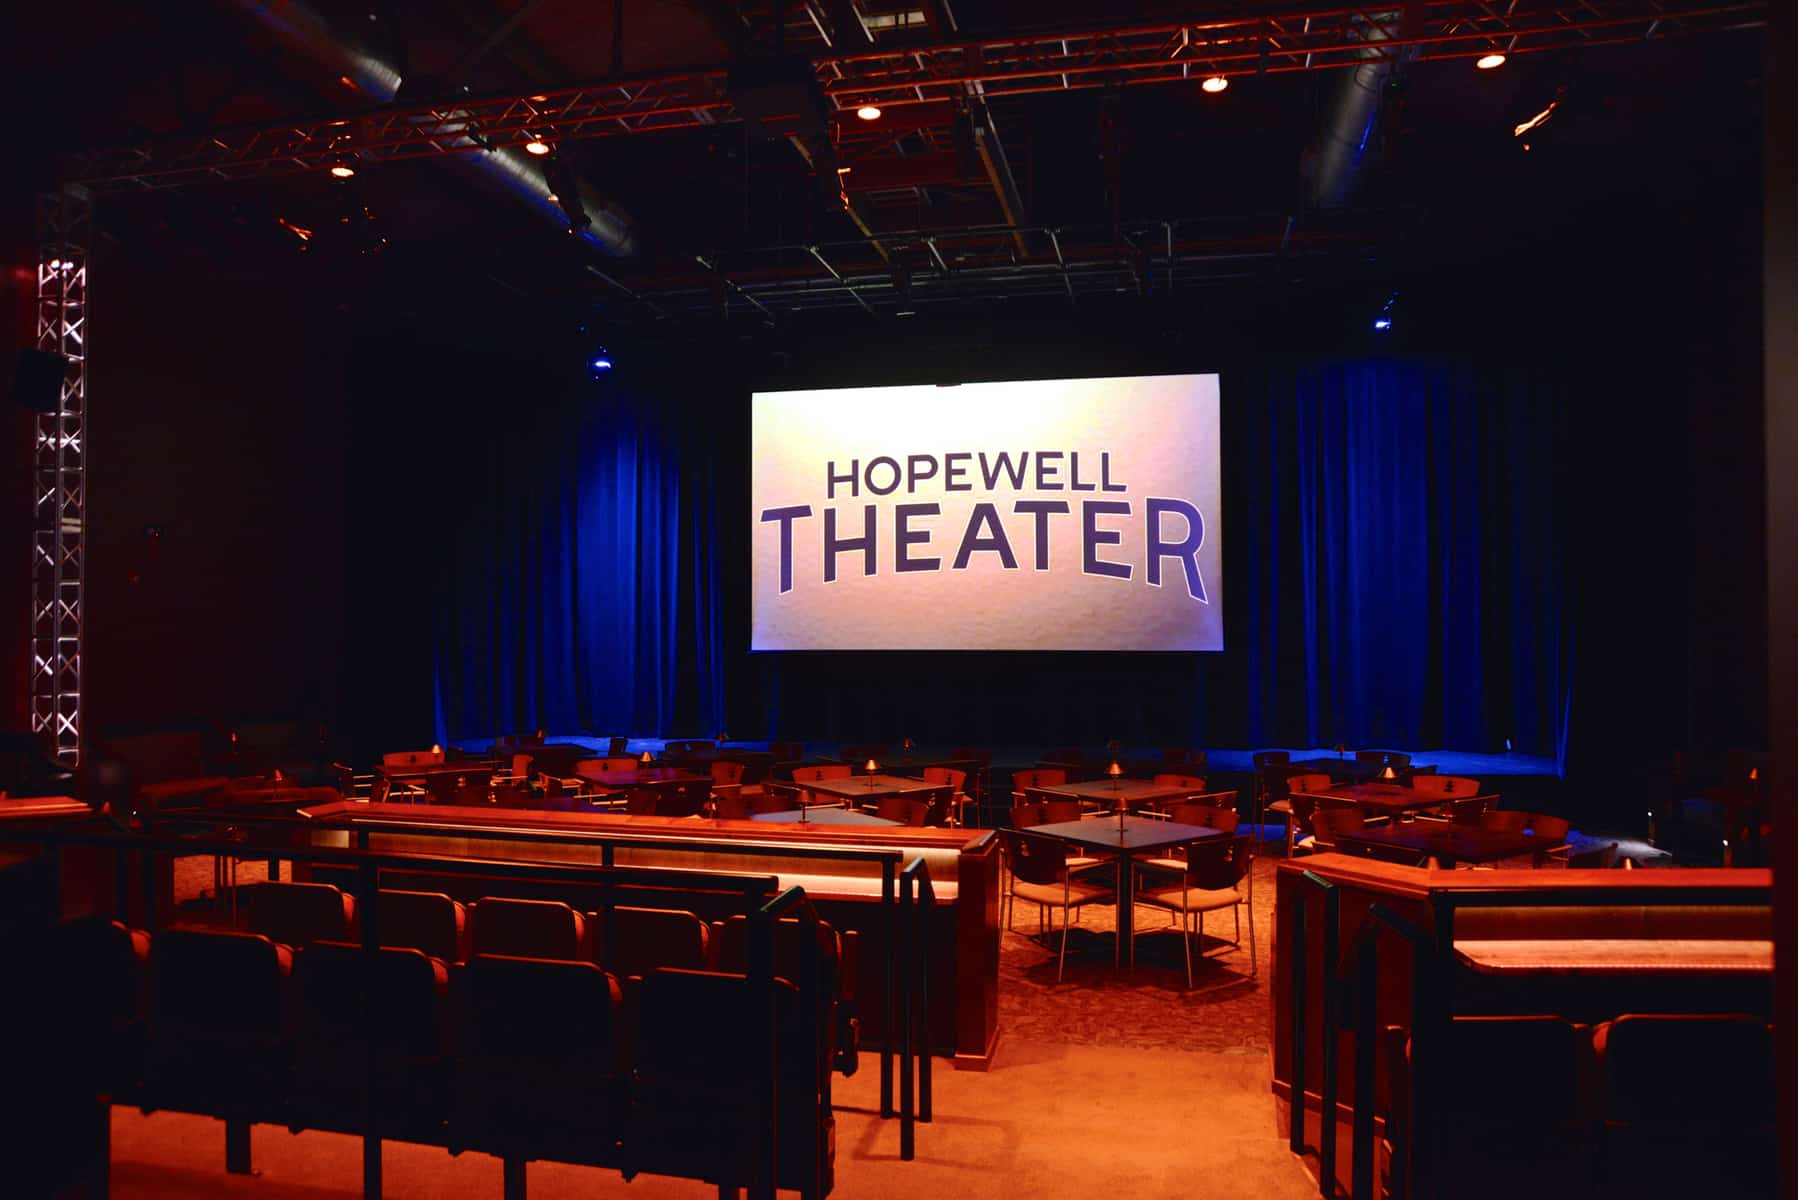 The return of the Hopewell Theater: A sequel